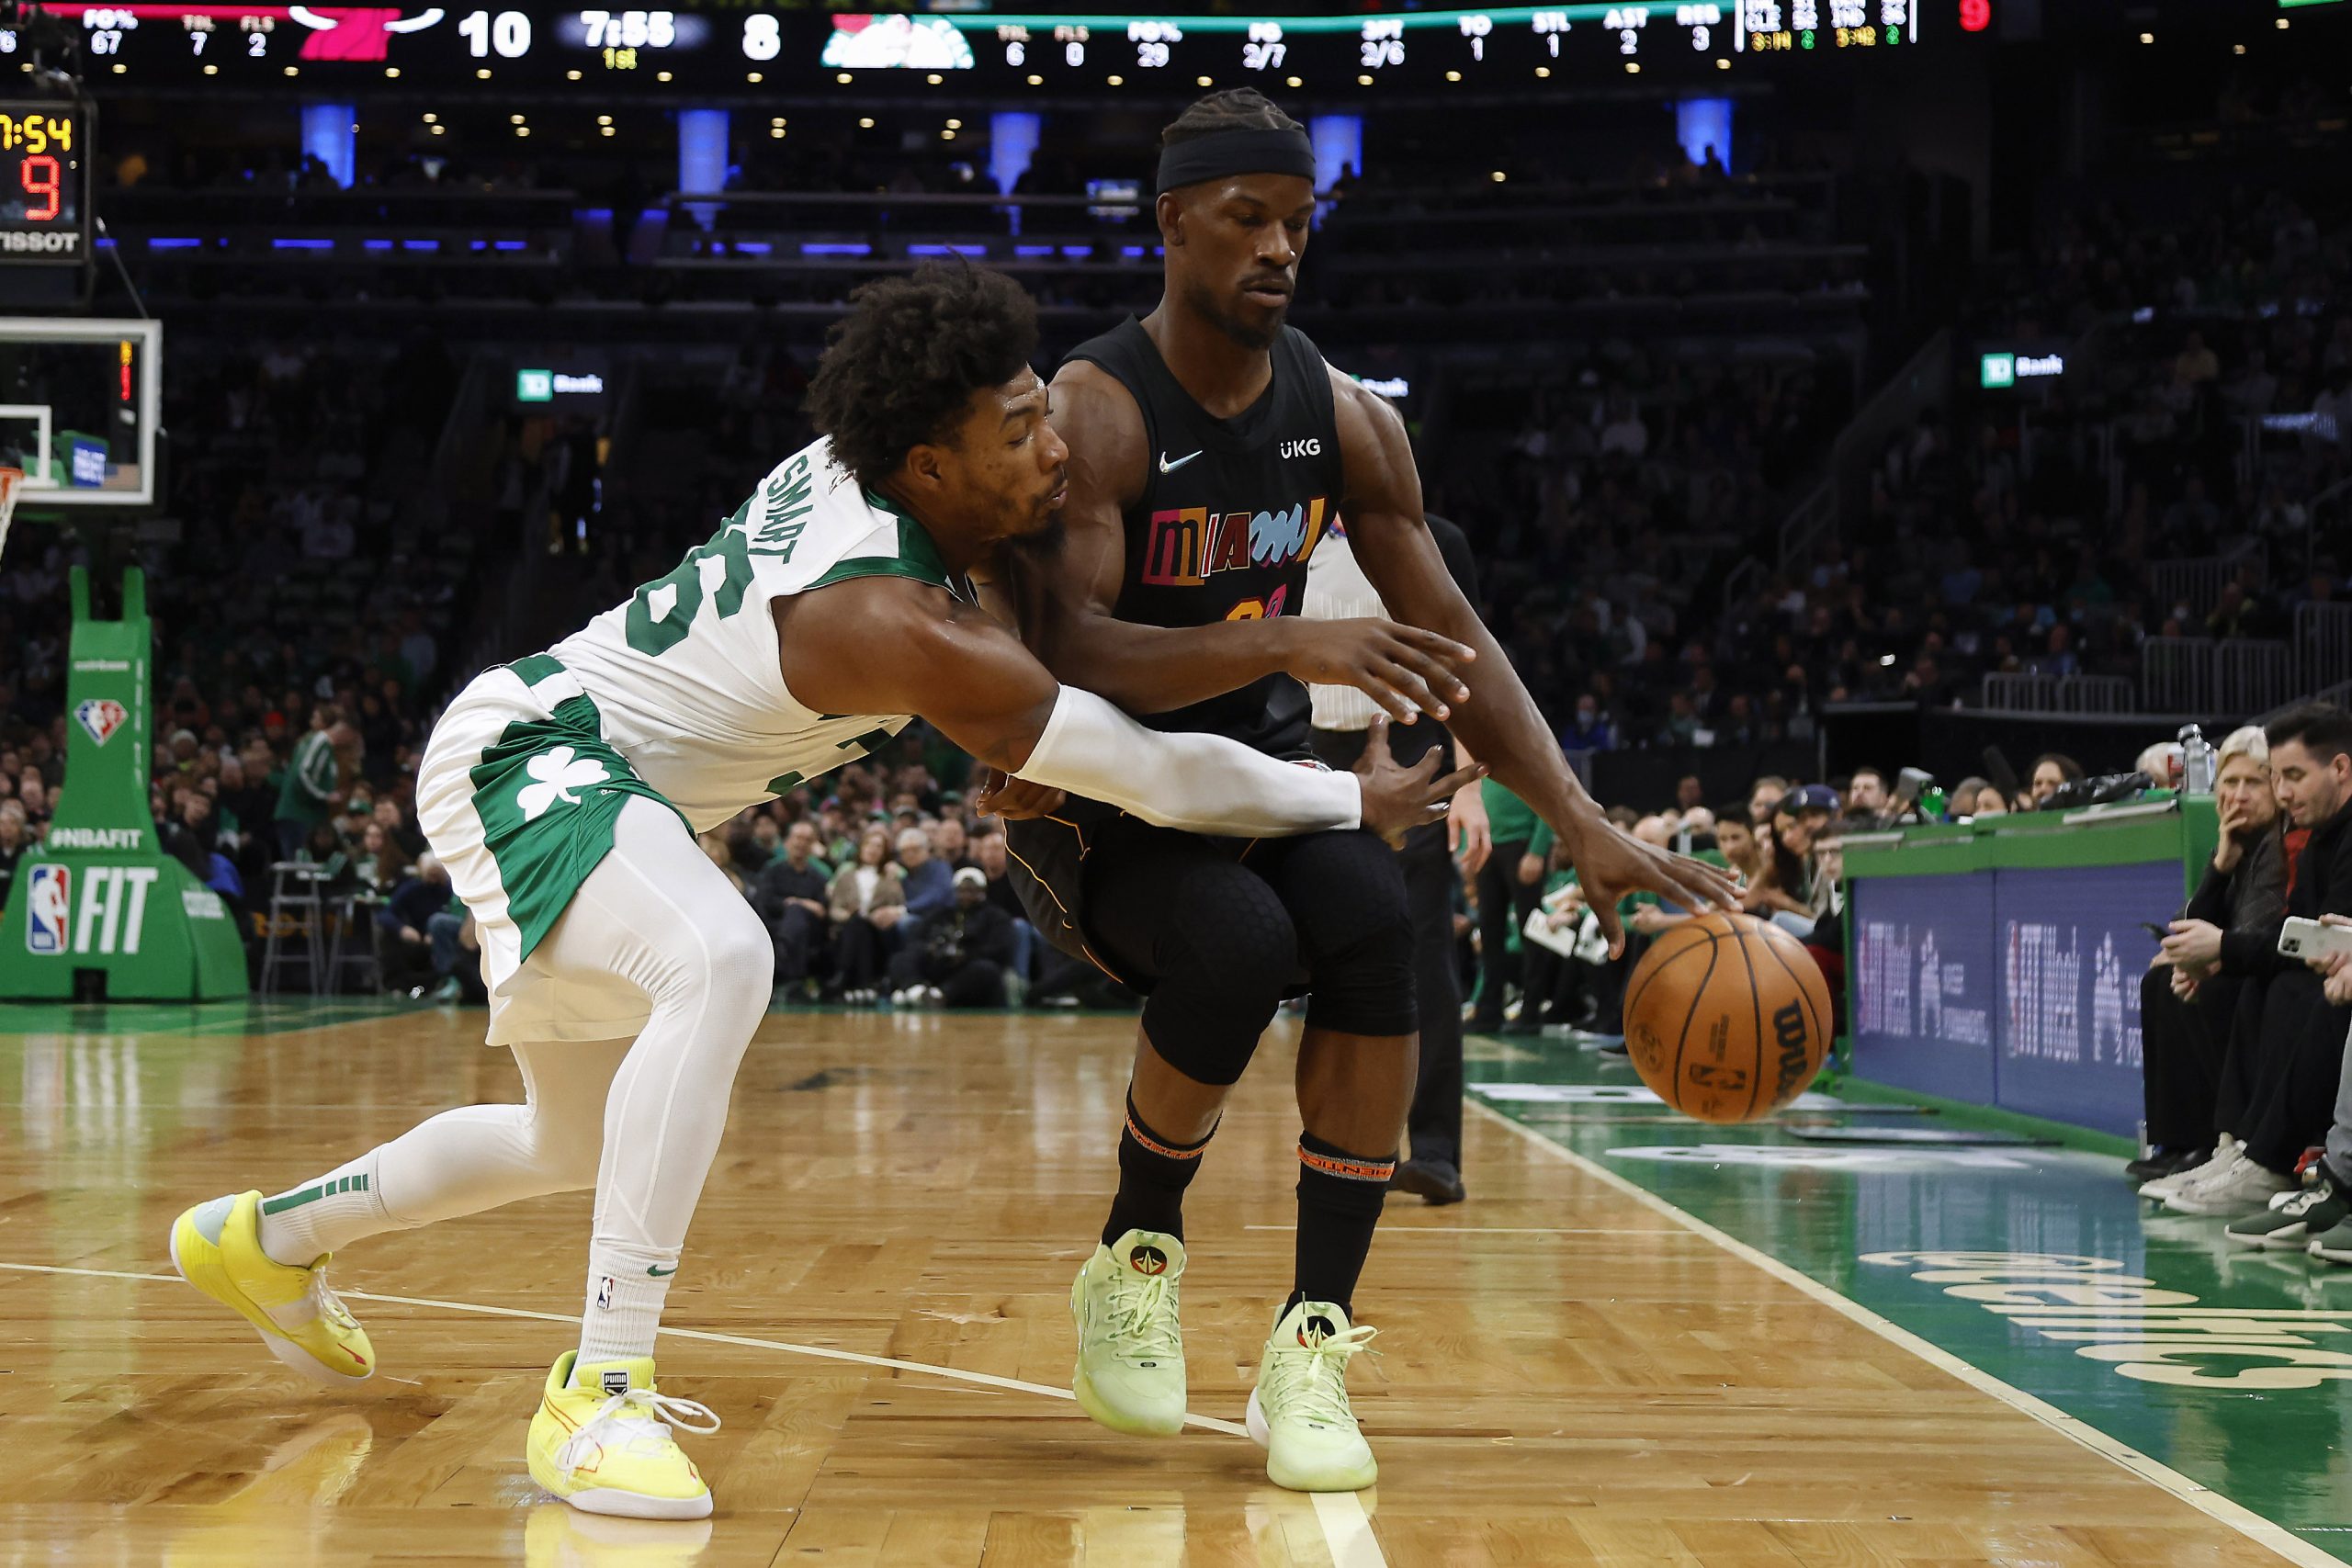 Marcus Smart of the Boston Celtics reaches in to try to steal the ball from Jimmy Butler of the Miami Heat.